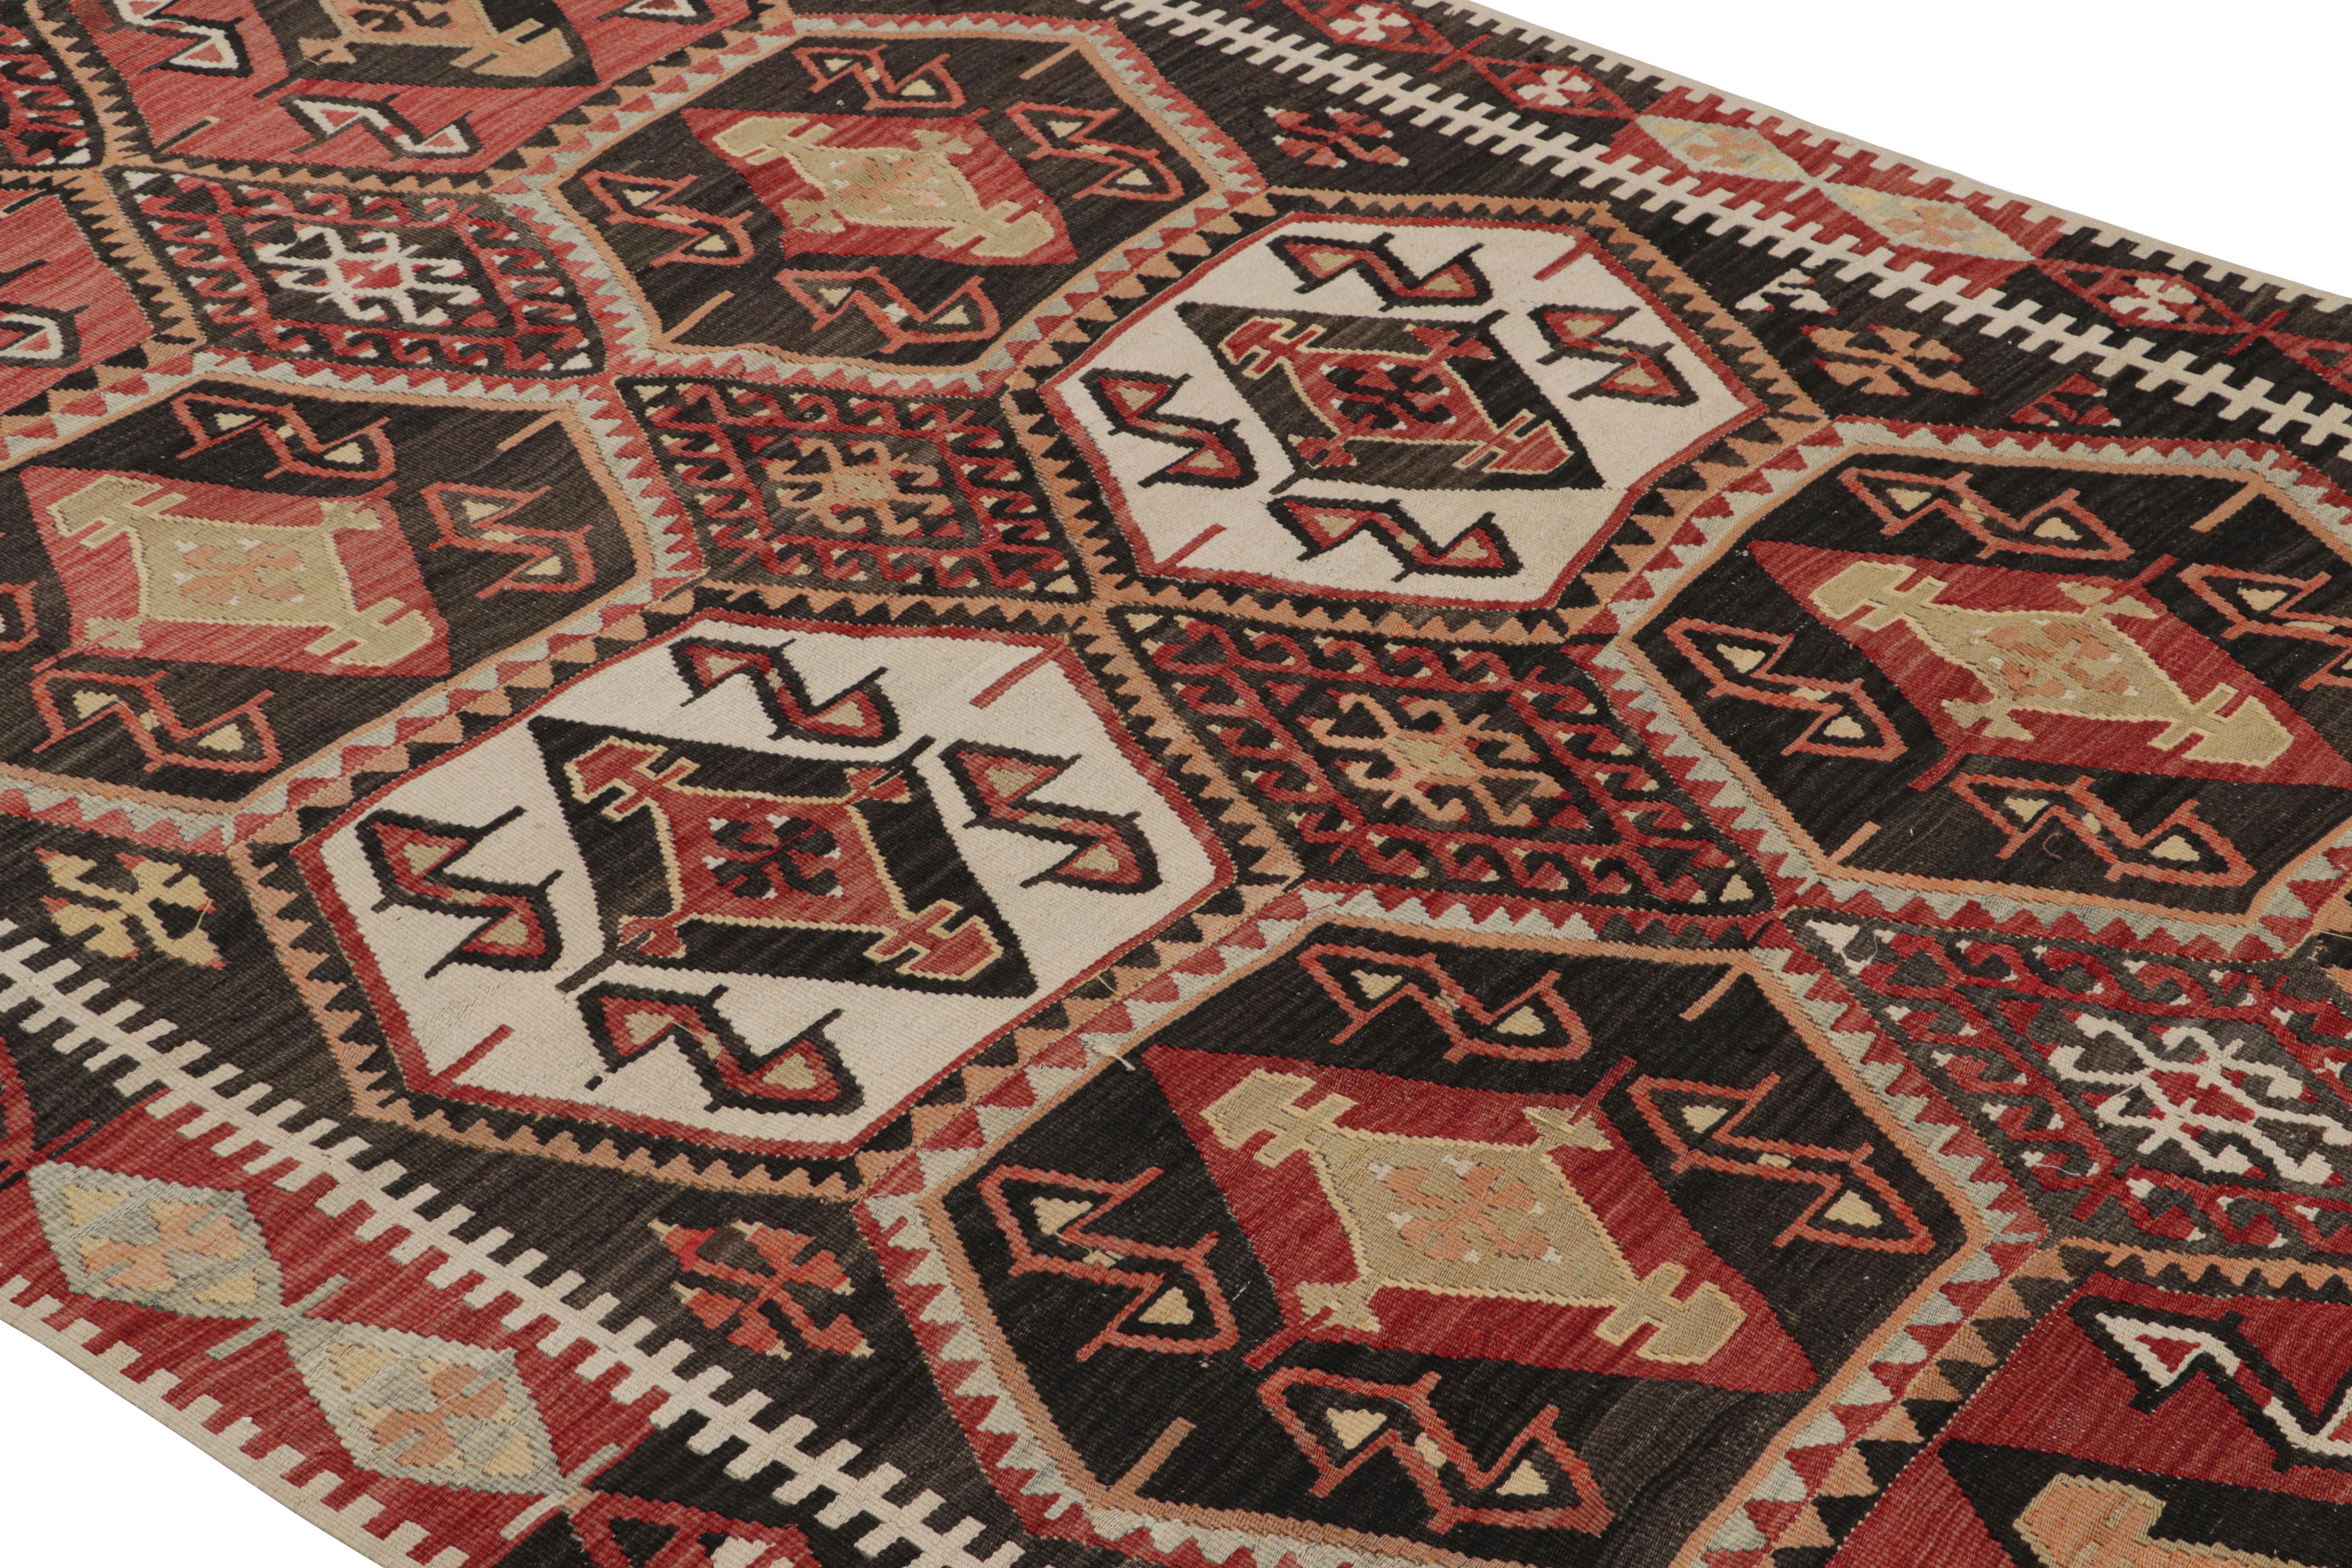 Flat-woven in Turkey originating between 1950-1960, this vintage midcentury geometric kilim hails from the city of Malatya, enjoying a bold tribal contrast of its rich burgundy red and brown hues with the crisp off-white and soothing yellow tones